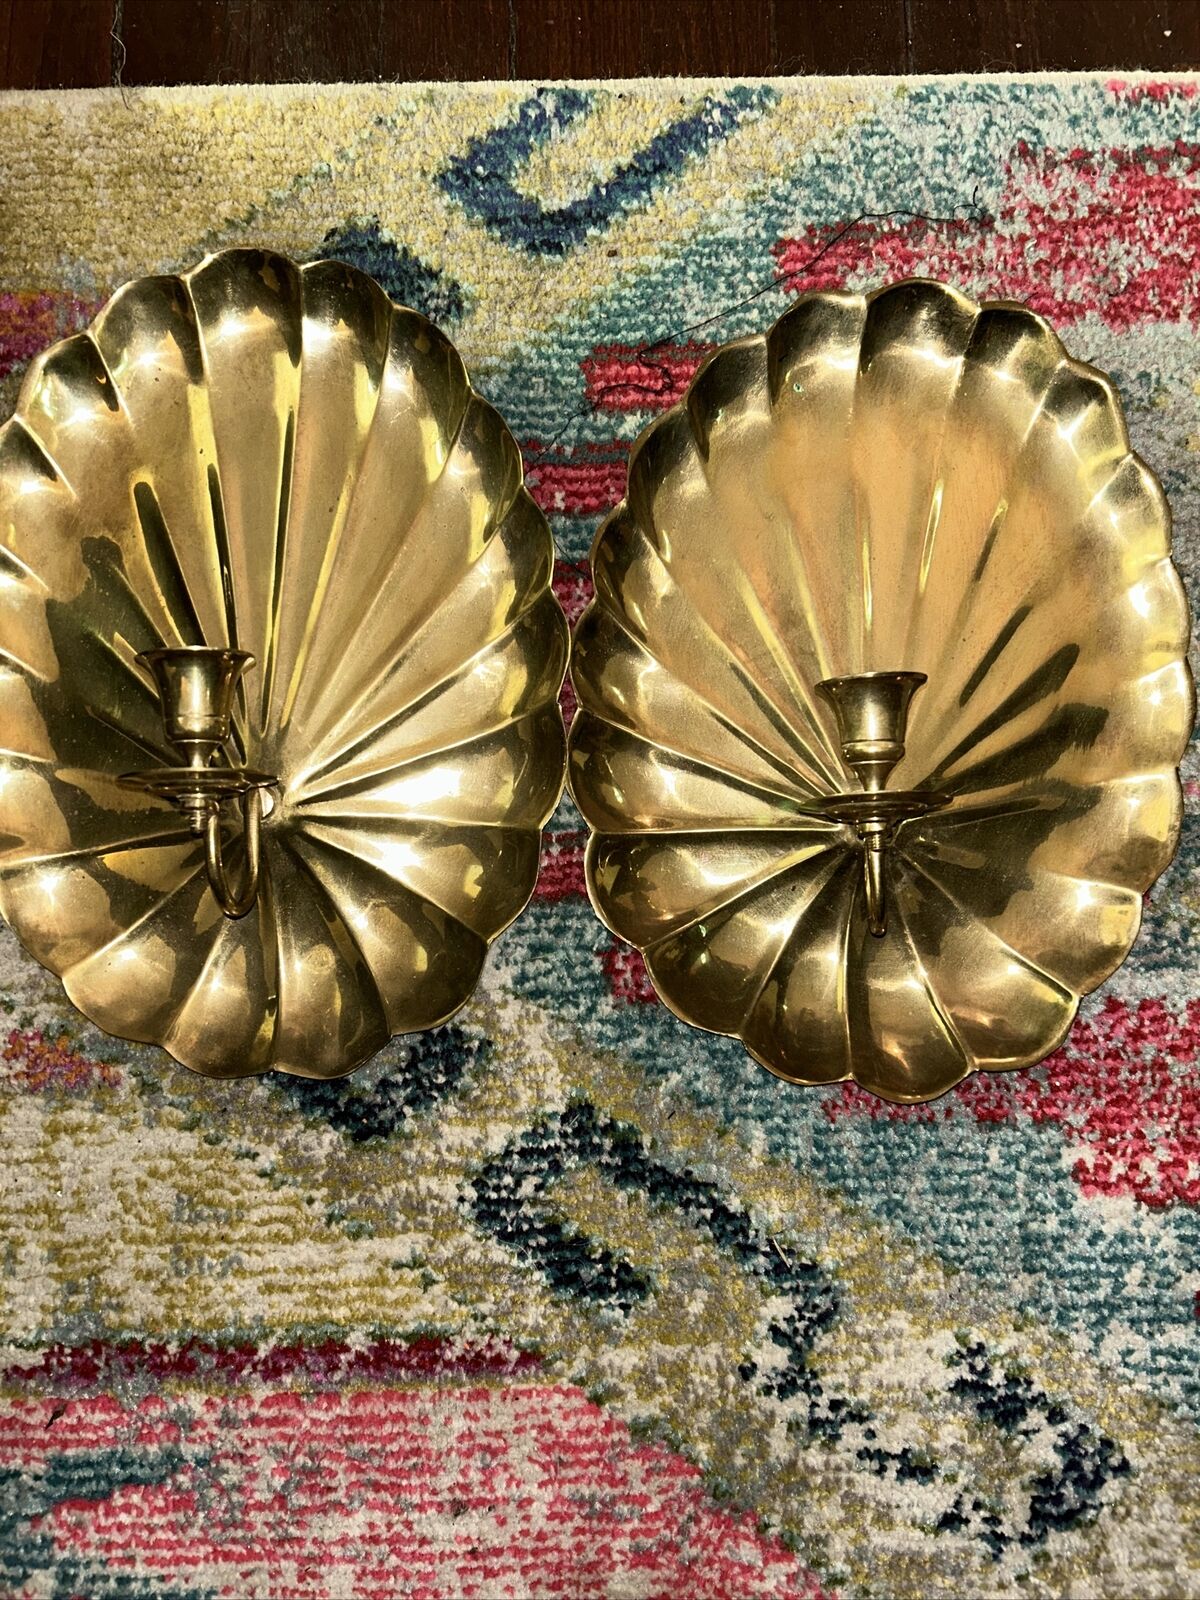 2 Vintage Beautiful Art Deco Brass Shell Candle Wall Sconces. LARGE Gorgeous